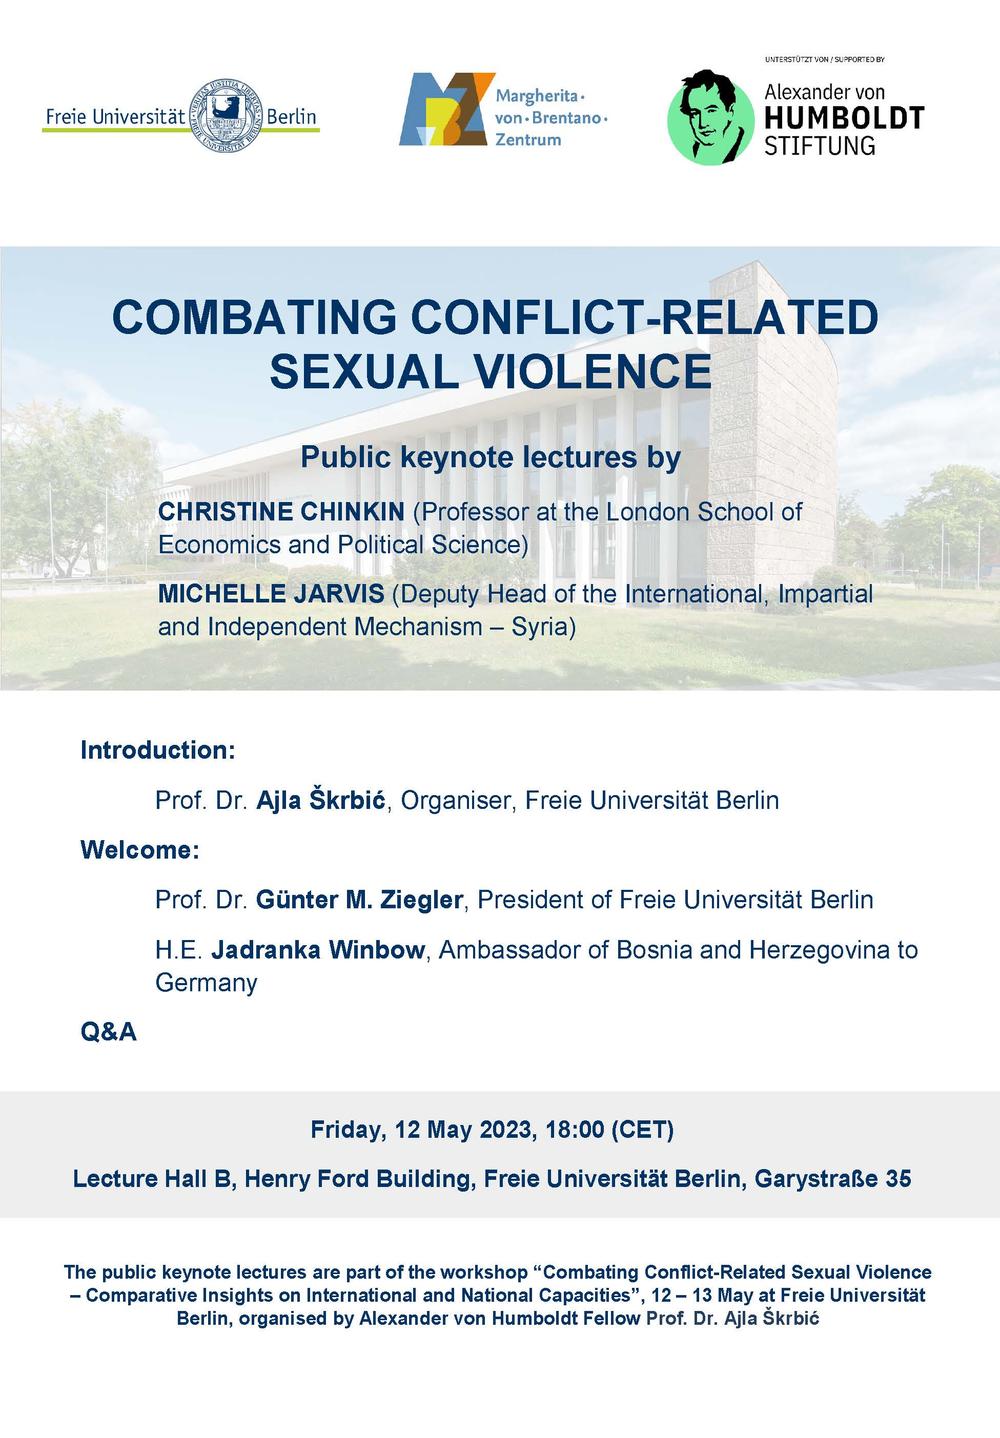 Public keynote lectures COMBATING CONFLICT-RELATED SEXUAL VIOLENCE by Chinkin and Jarvis_12.05.2023